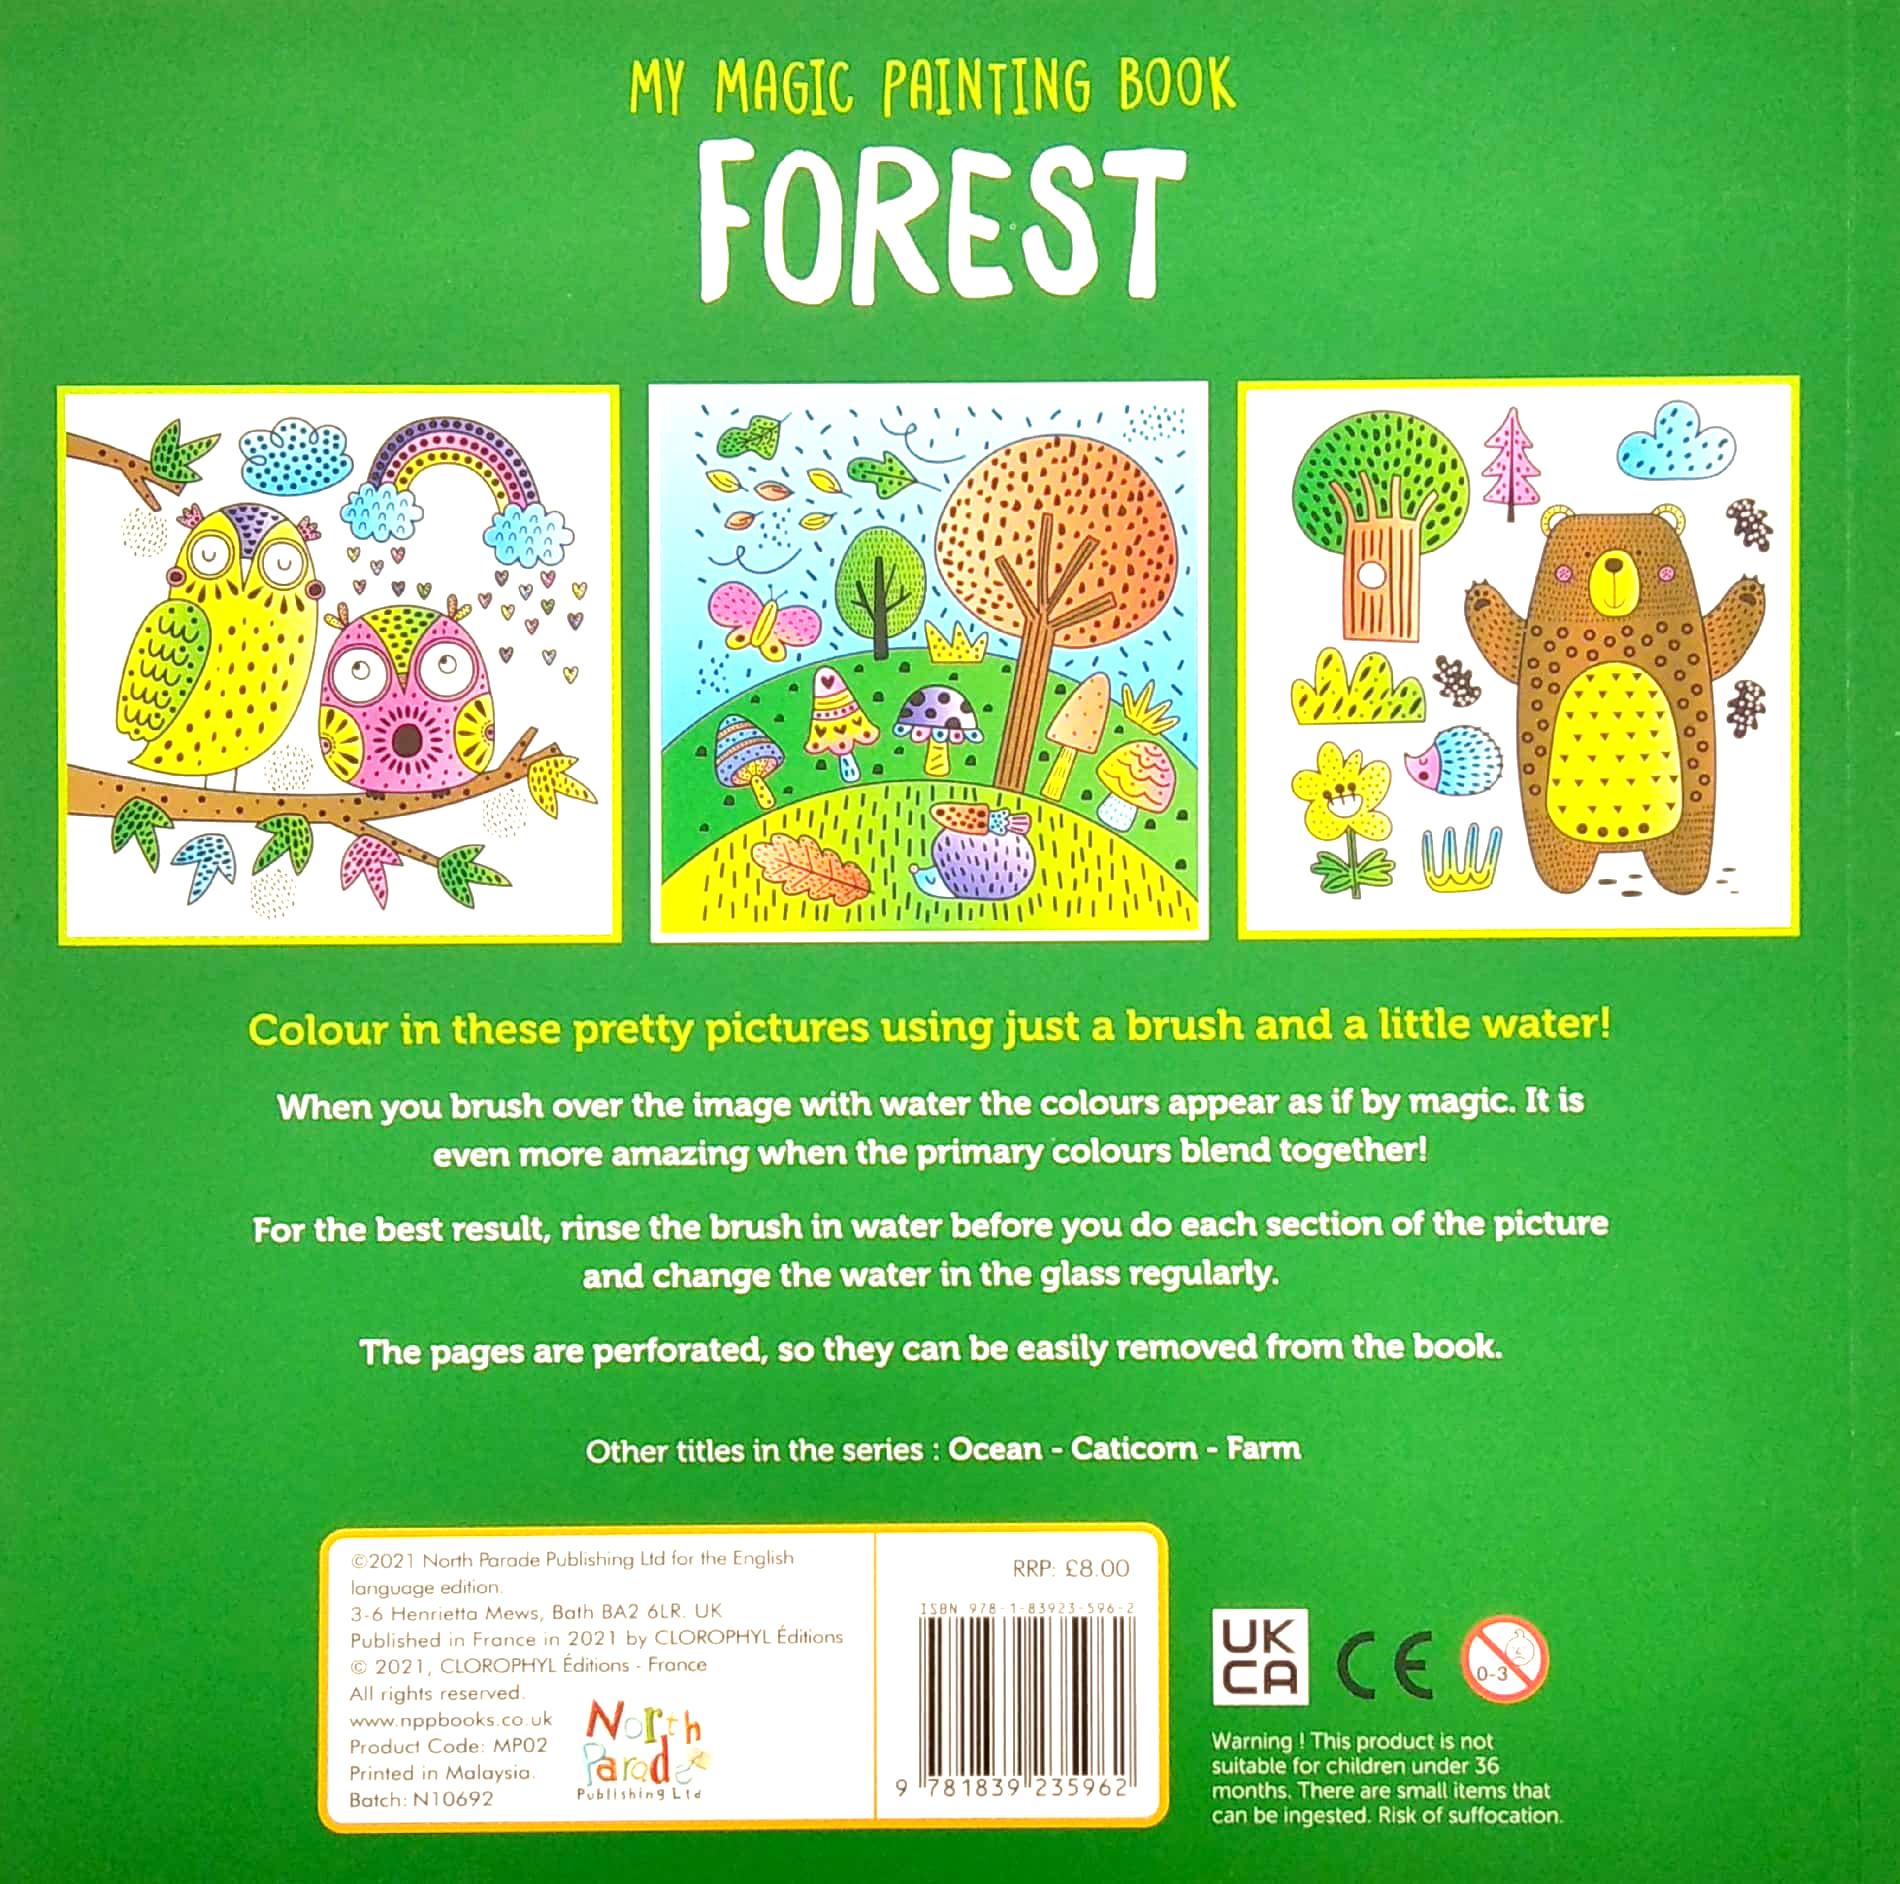 My Magic Painting Book: Forest